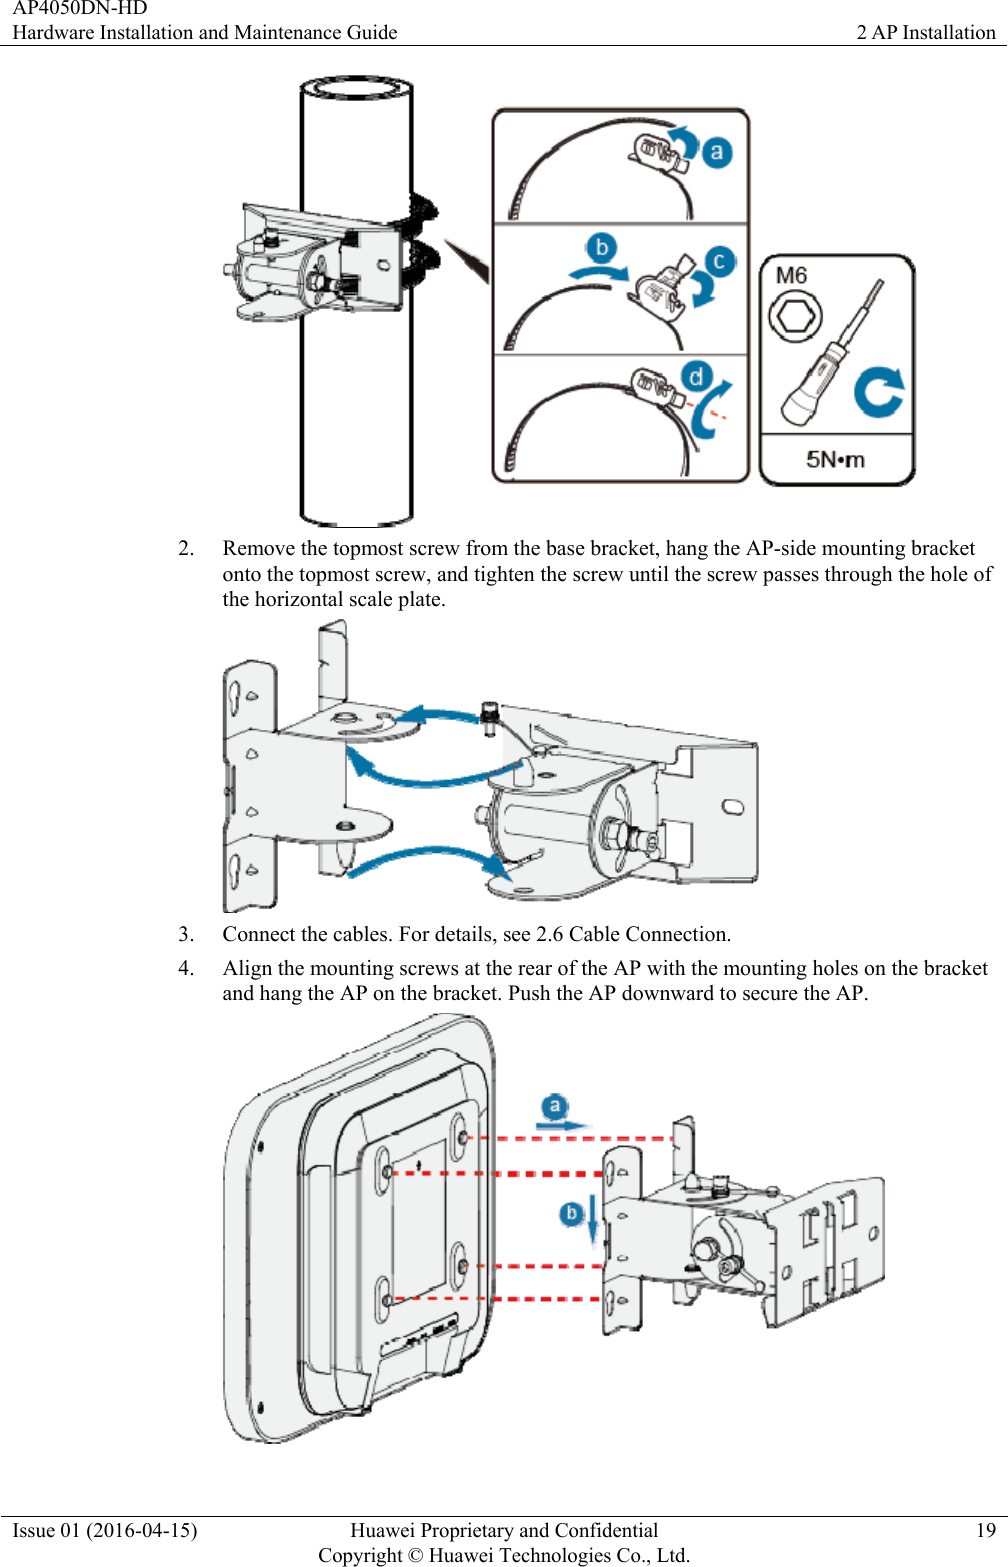 AP4050DN-HD Hardware Installation and Maintenance Guide  2 AP Installation Issue 01 (2016-04-15)  Huawei Proprietary and Confidential         Copyright © Huawei Technologies Co., Ltd.19  2. Remove the topmost screw from the base bracket, hang the AP-side mounting bracket onto the topmost screw, and tighten the screw until the screw passes through the hole of the horizontal scale plate.  3. Connect the cables. For details, see 2.6 Cable Connection. 4. Align the mounting screws at the rear of the AP with the mounting holes on the bracket and hang the AP on the bracket. Push the AP downward to secure the AP.  